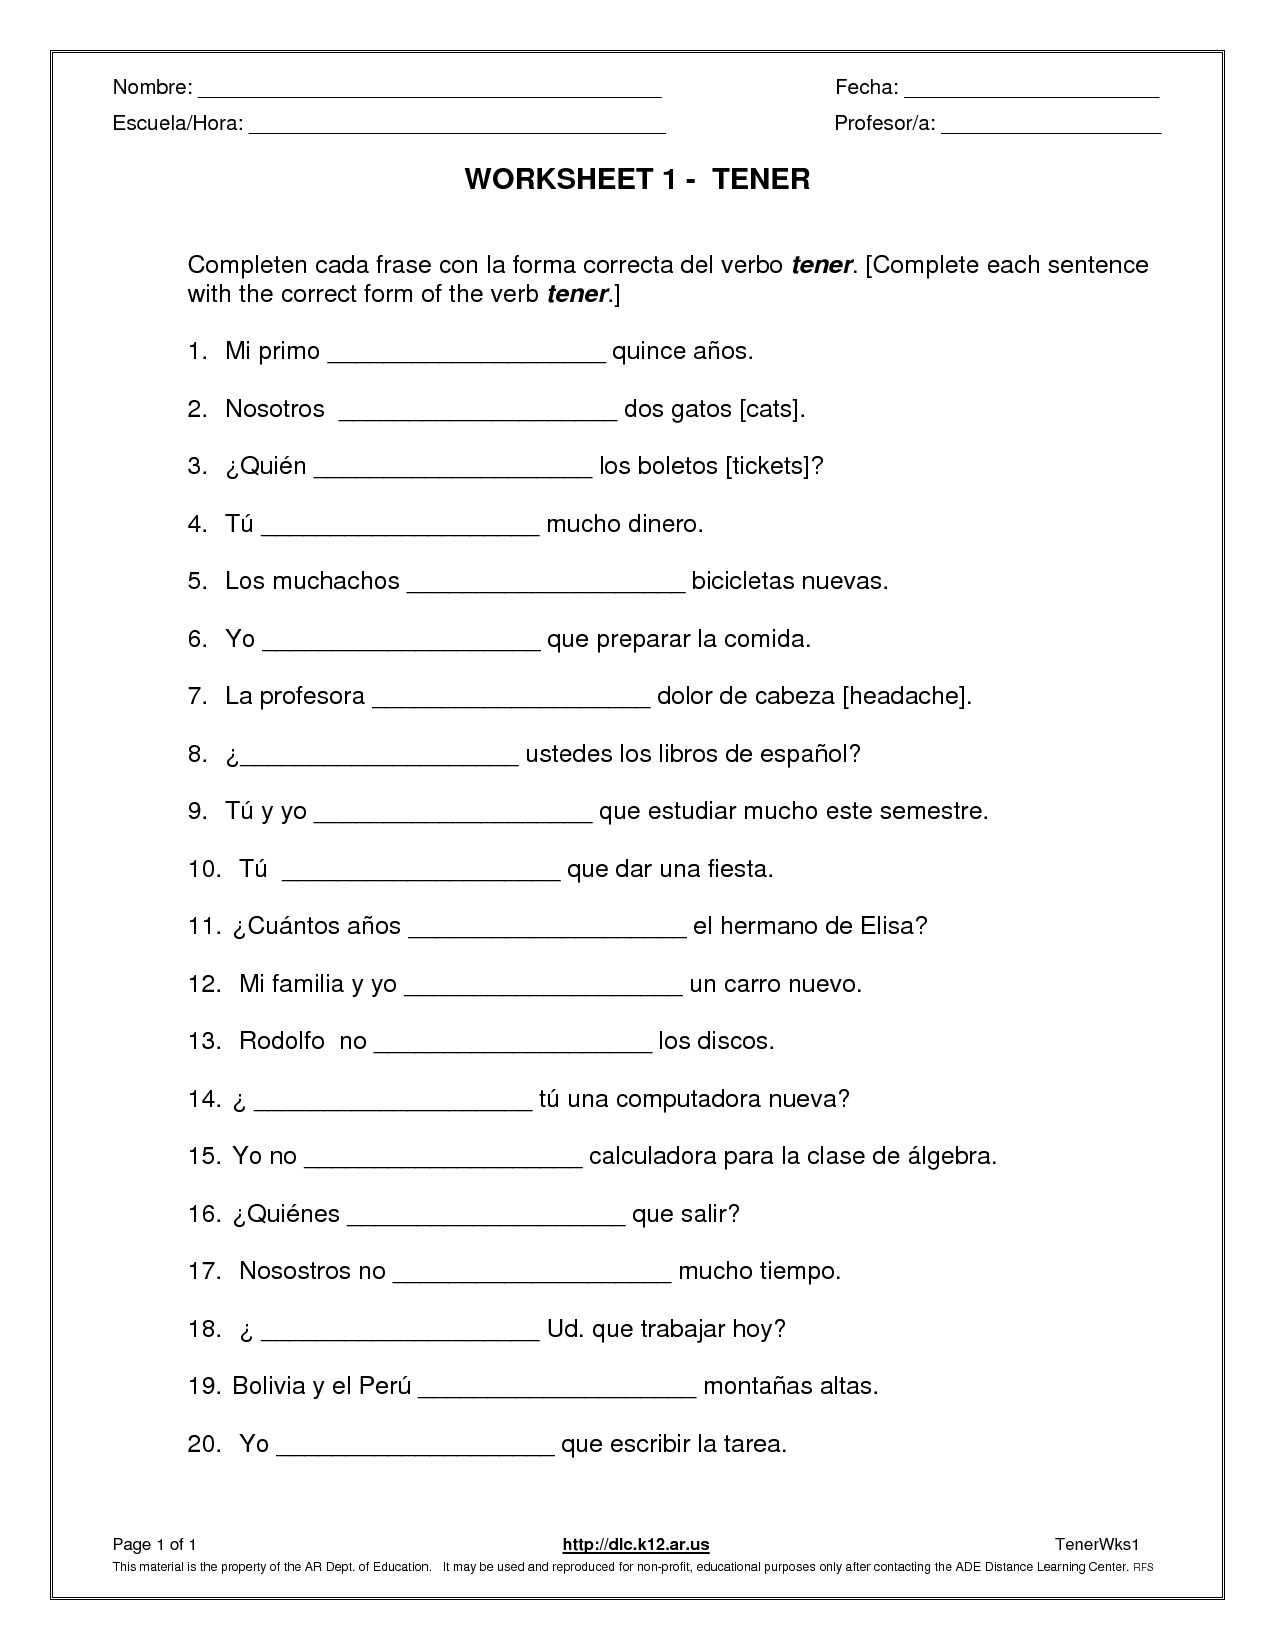 Agreement Of Adjectives Spanish Worksheet Answers